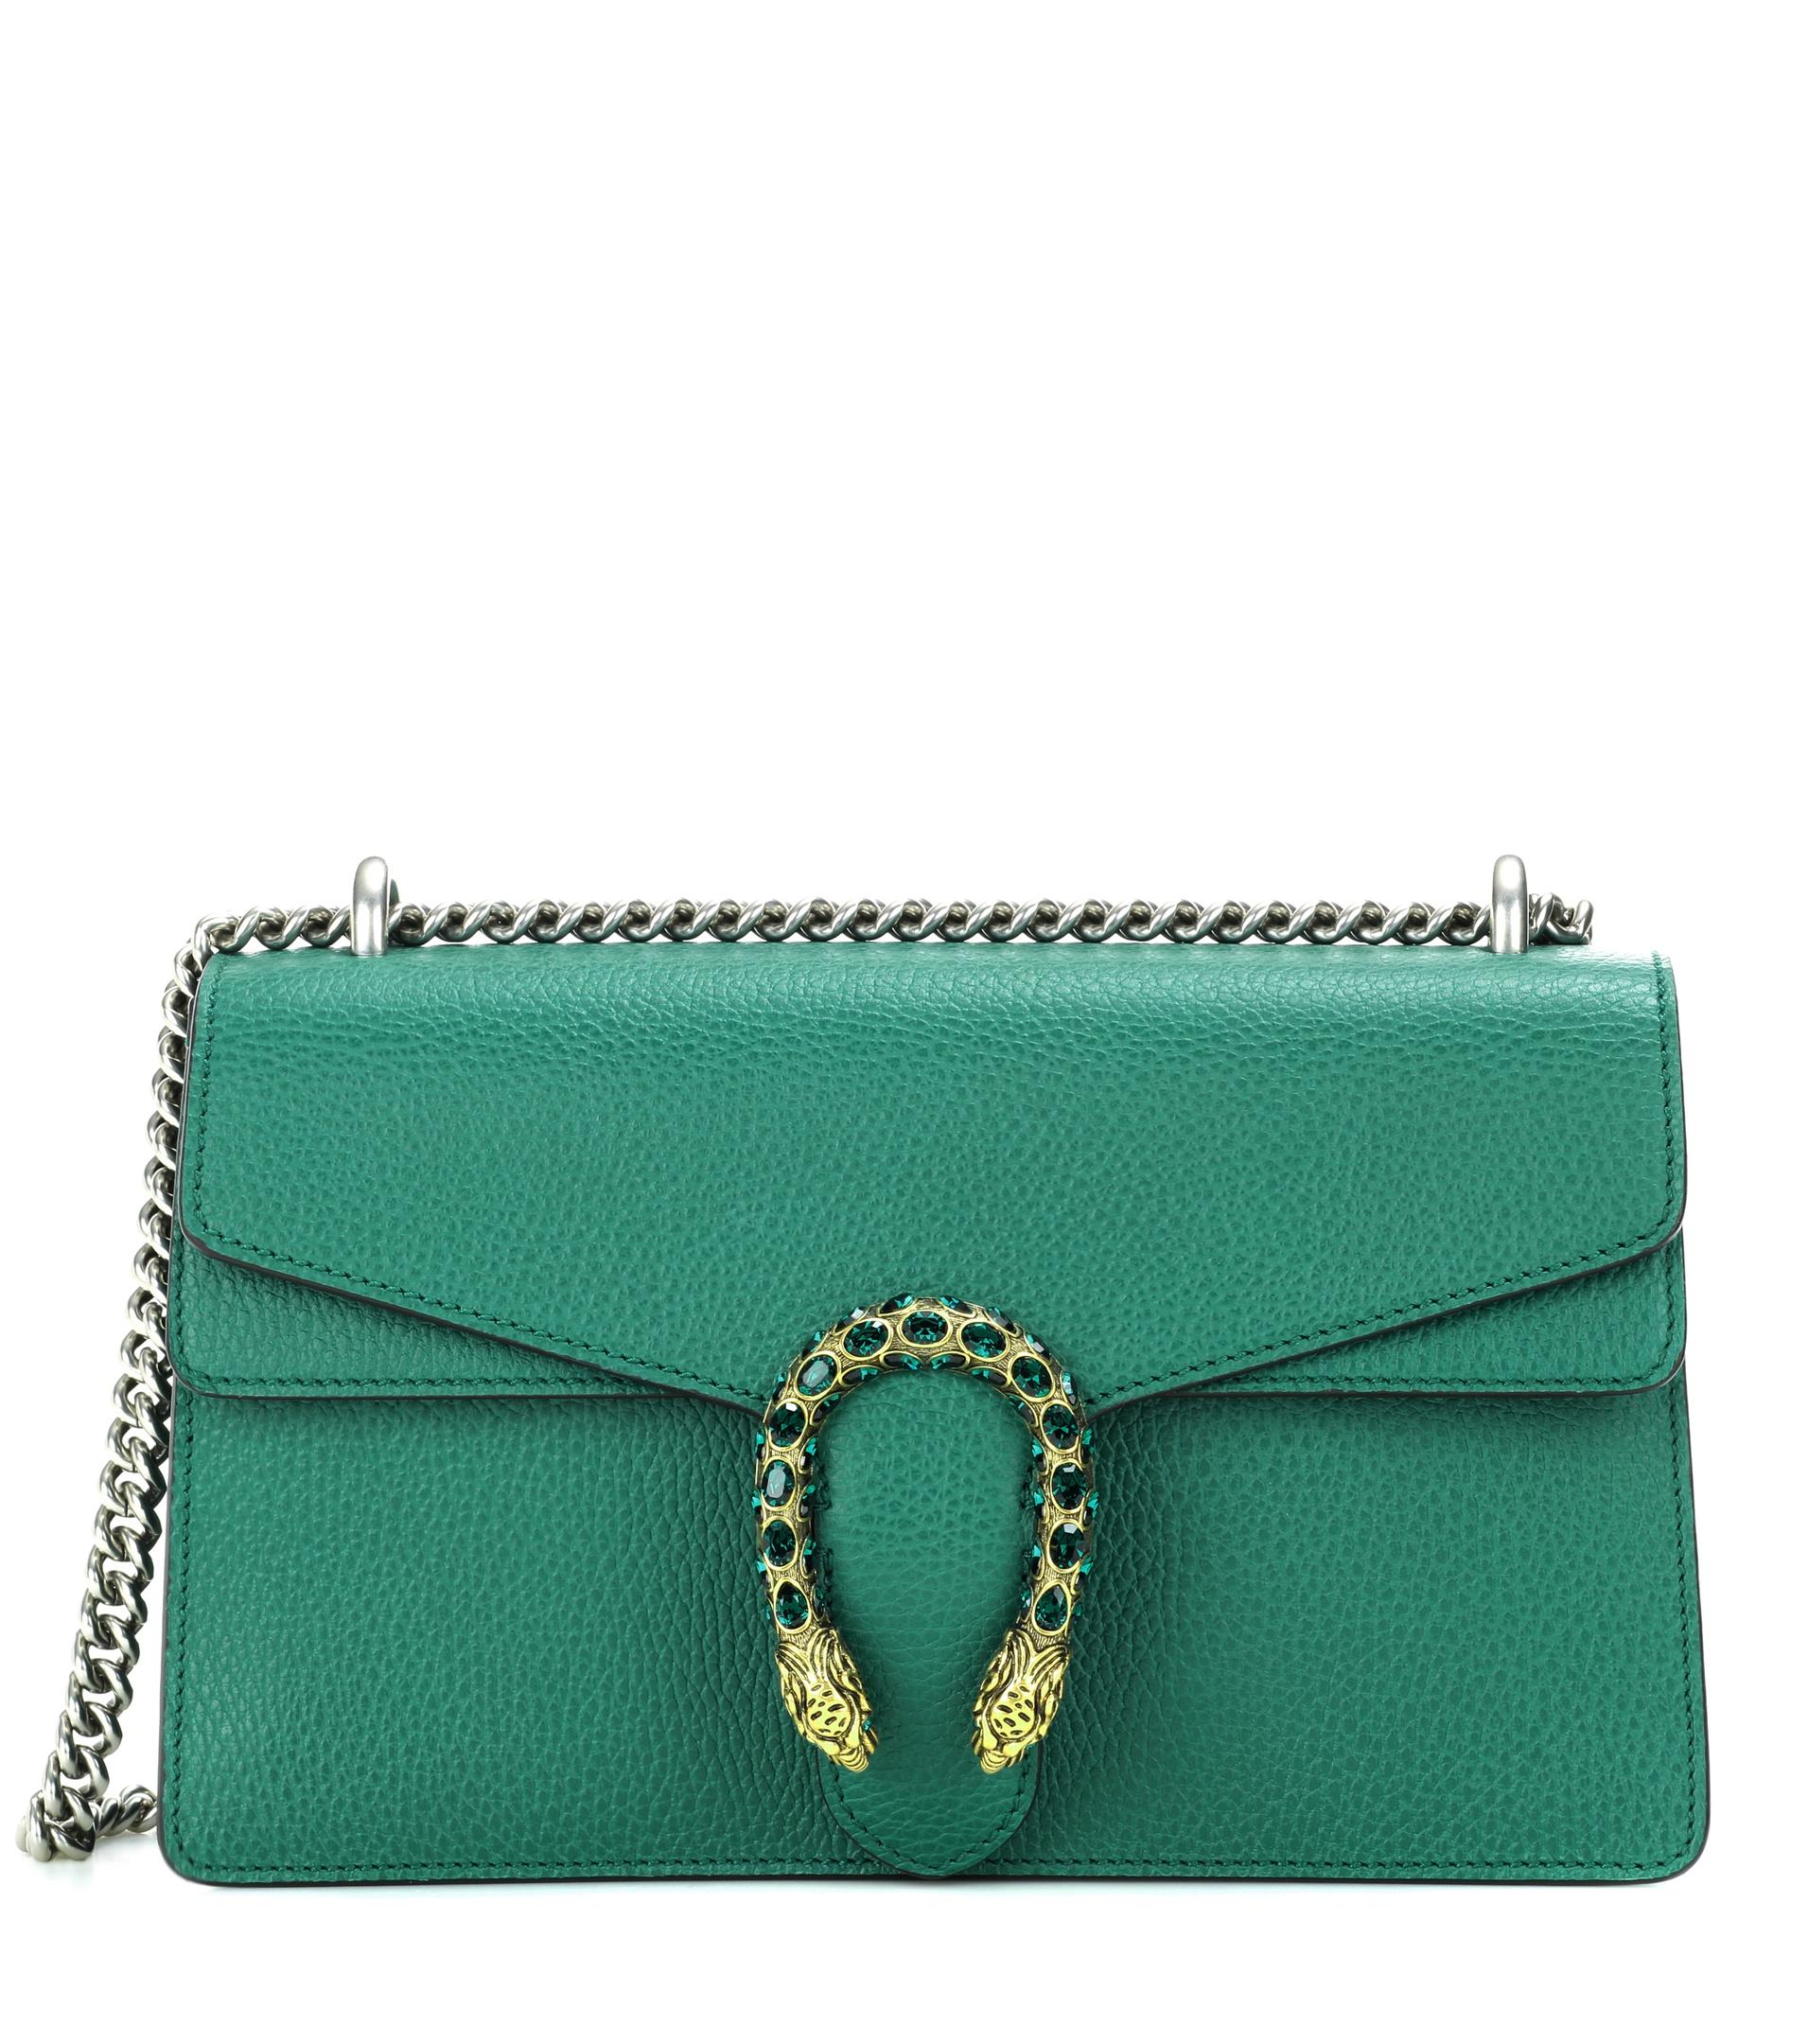 Lyst - Gucci Dionysus Small Leather Shoulder Bag in Green